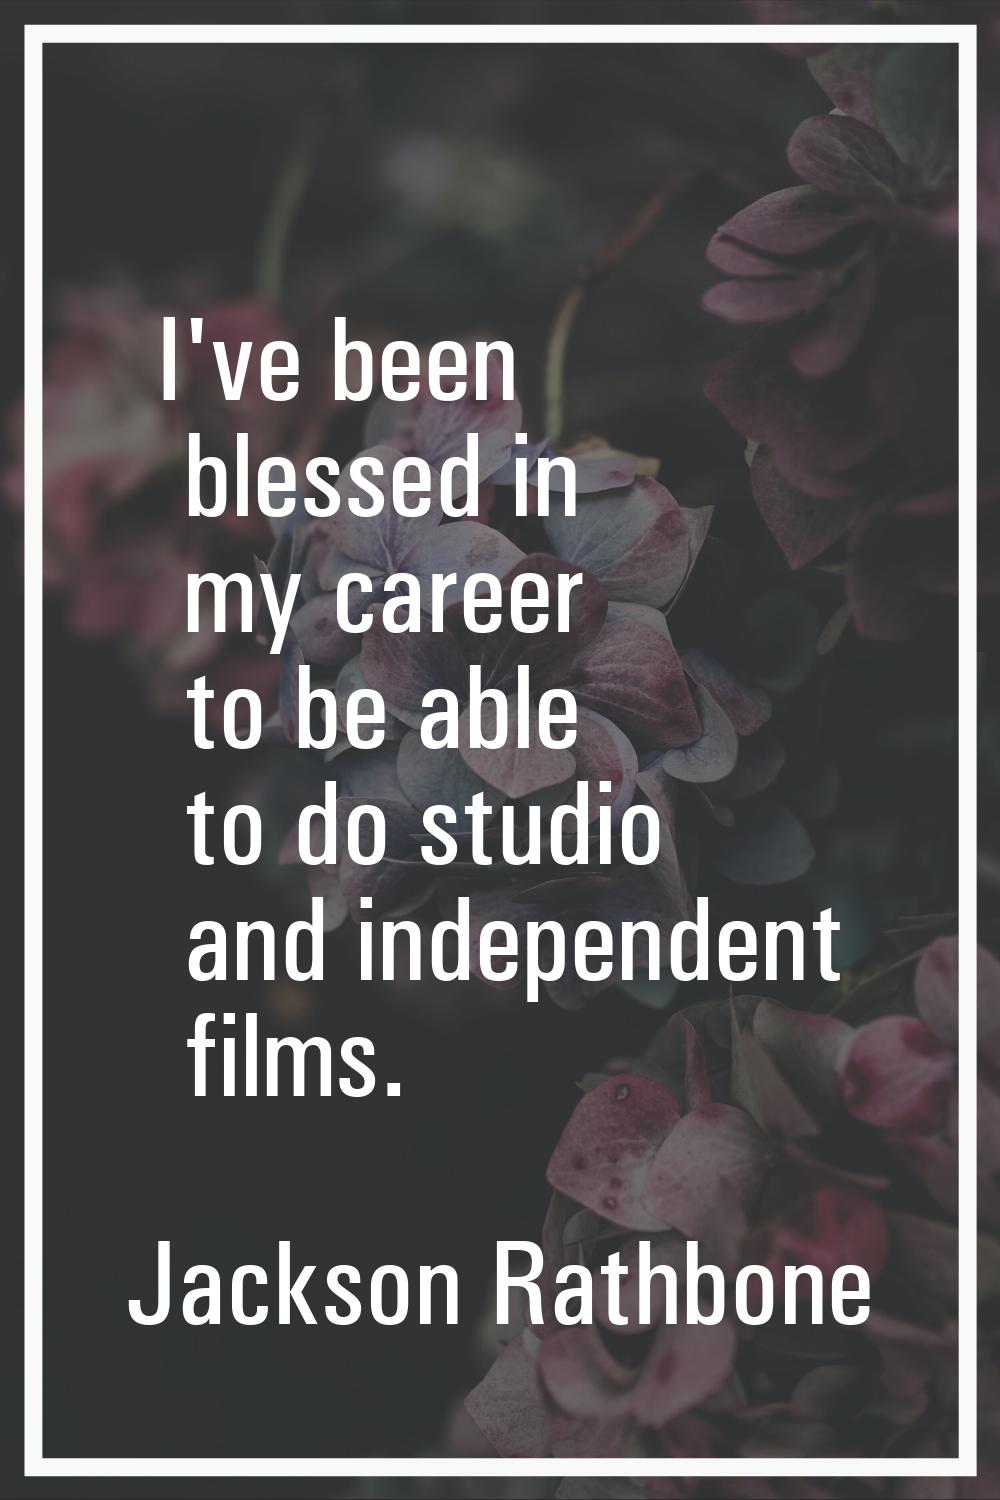 I've been blessed in my career to be able to do studio and independent films.